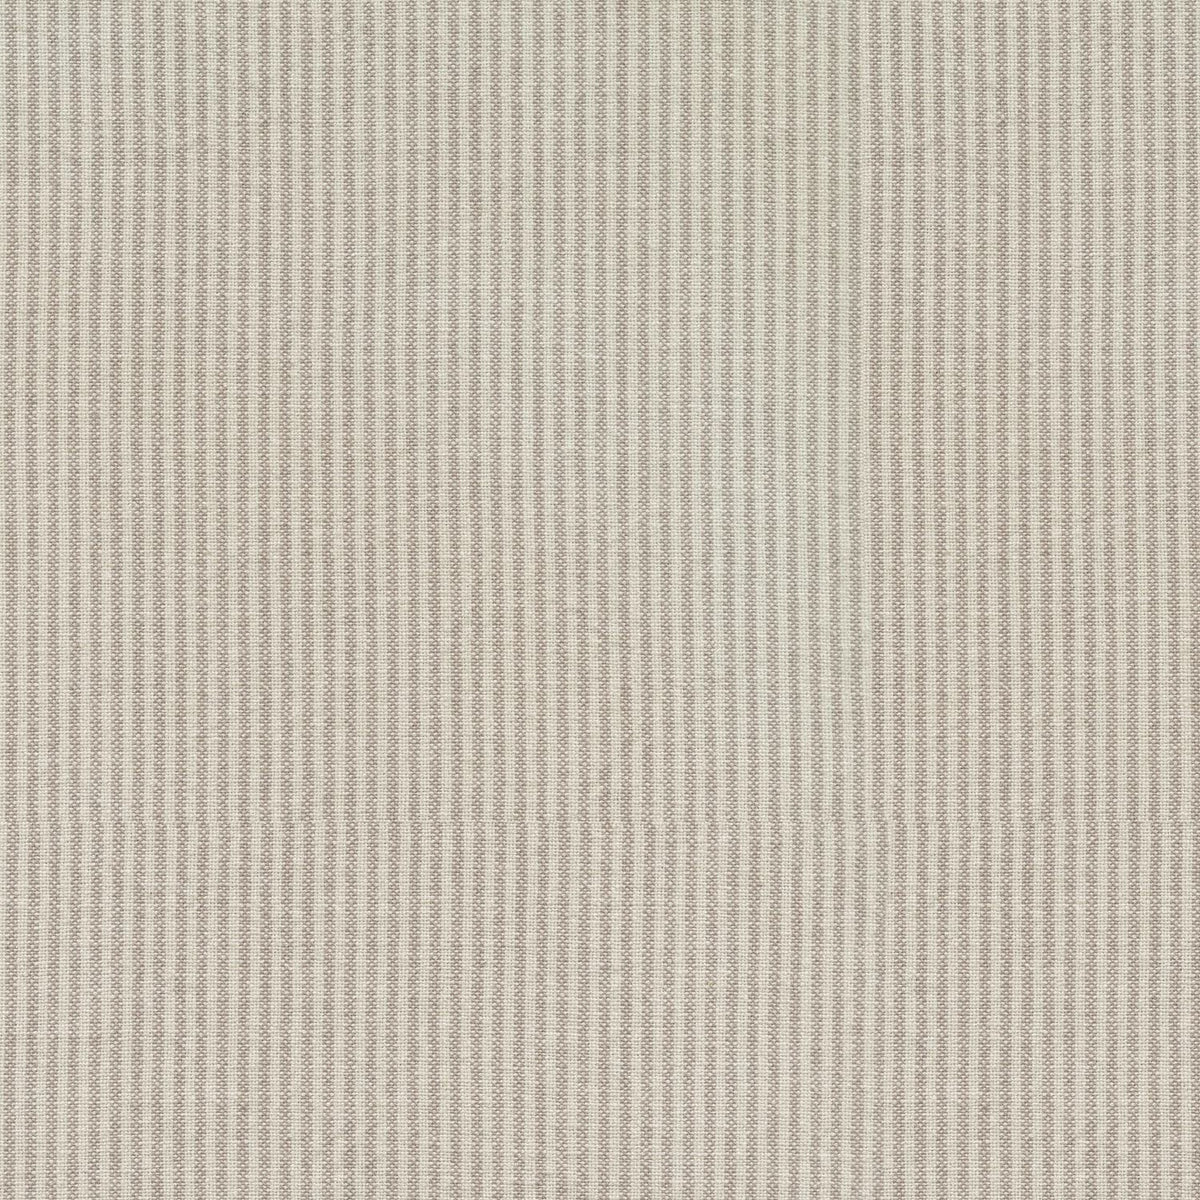 P/K Lifestyles Cullen Ticking - Thistle 410713 Upholstery Fabric